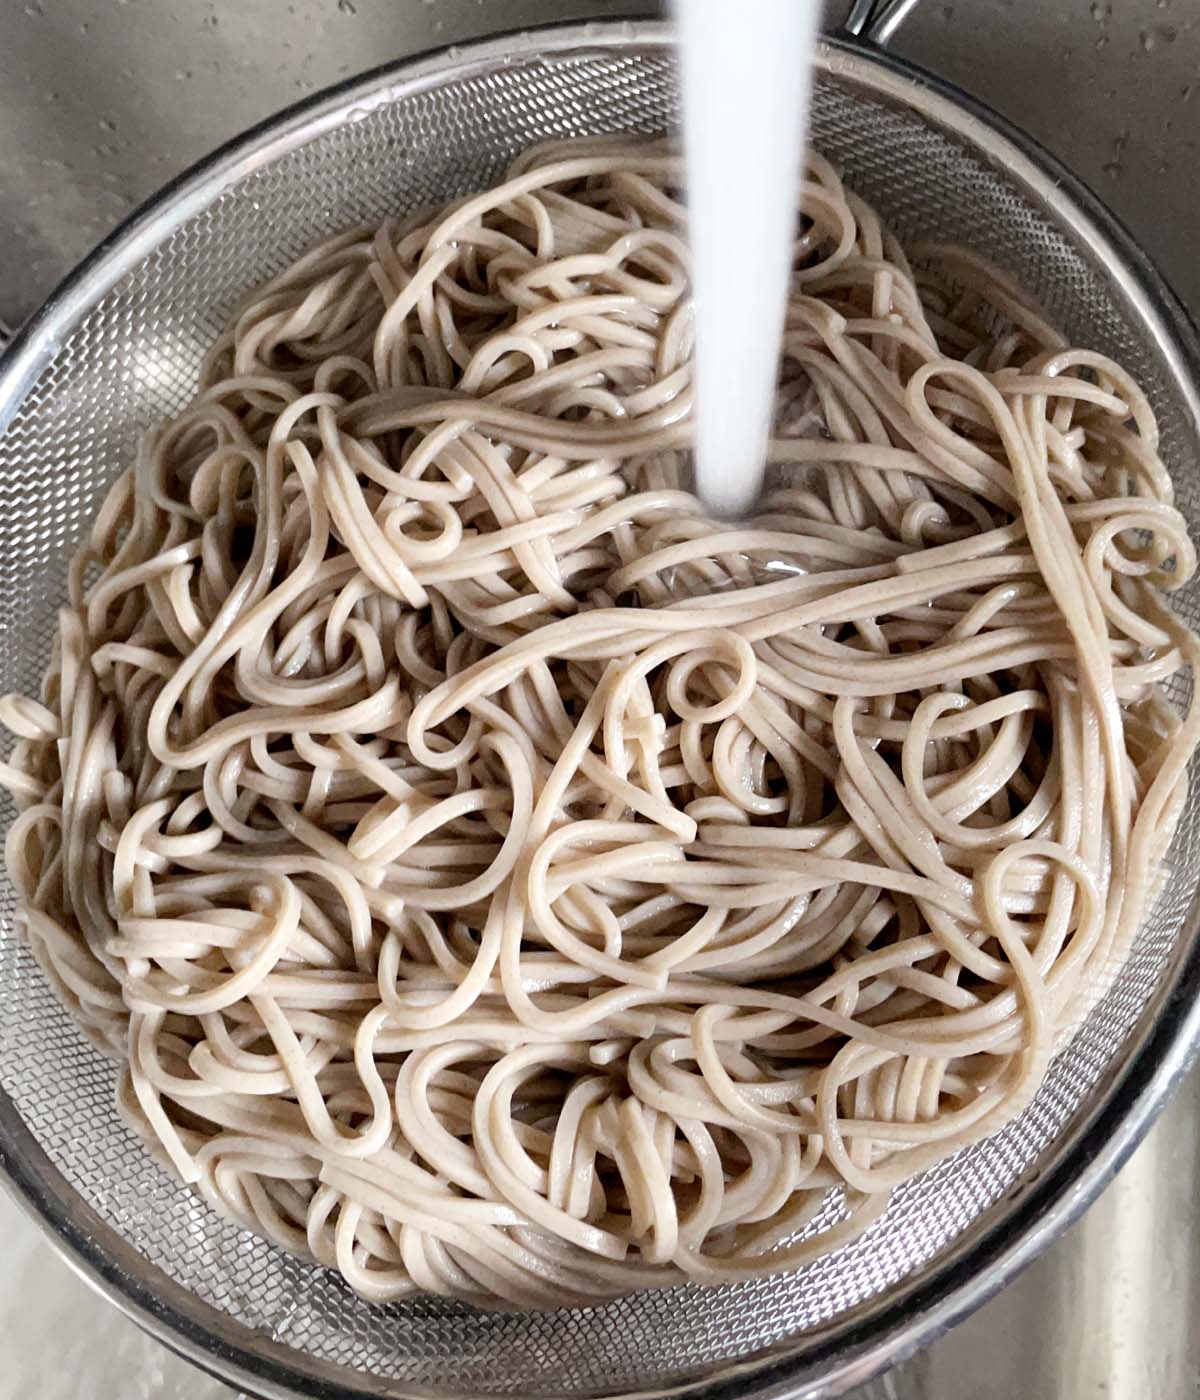 Water rinsing cooked light brown noodles in a metal colander.